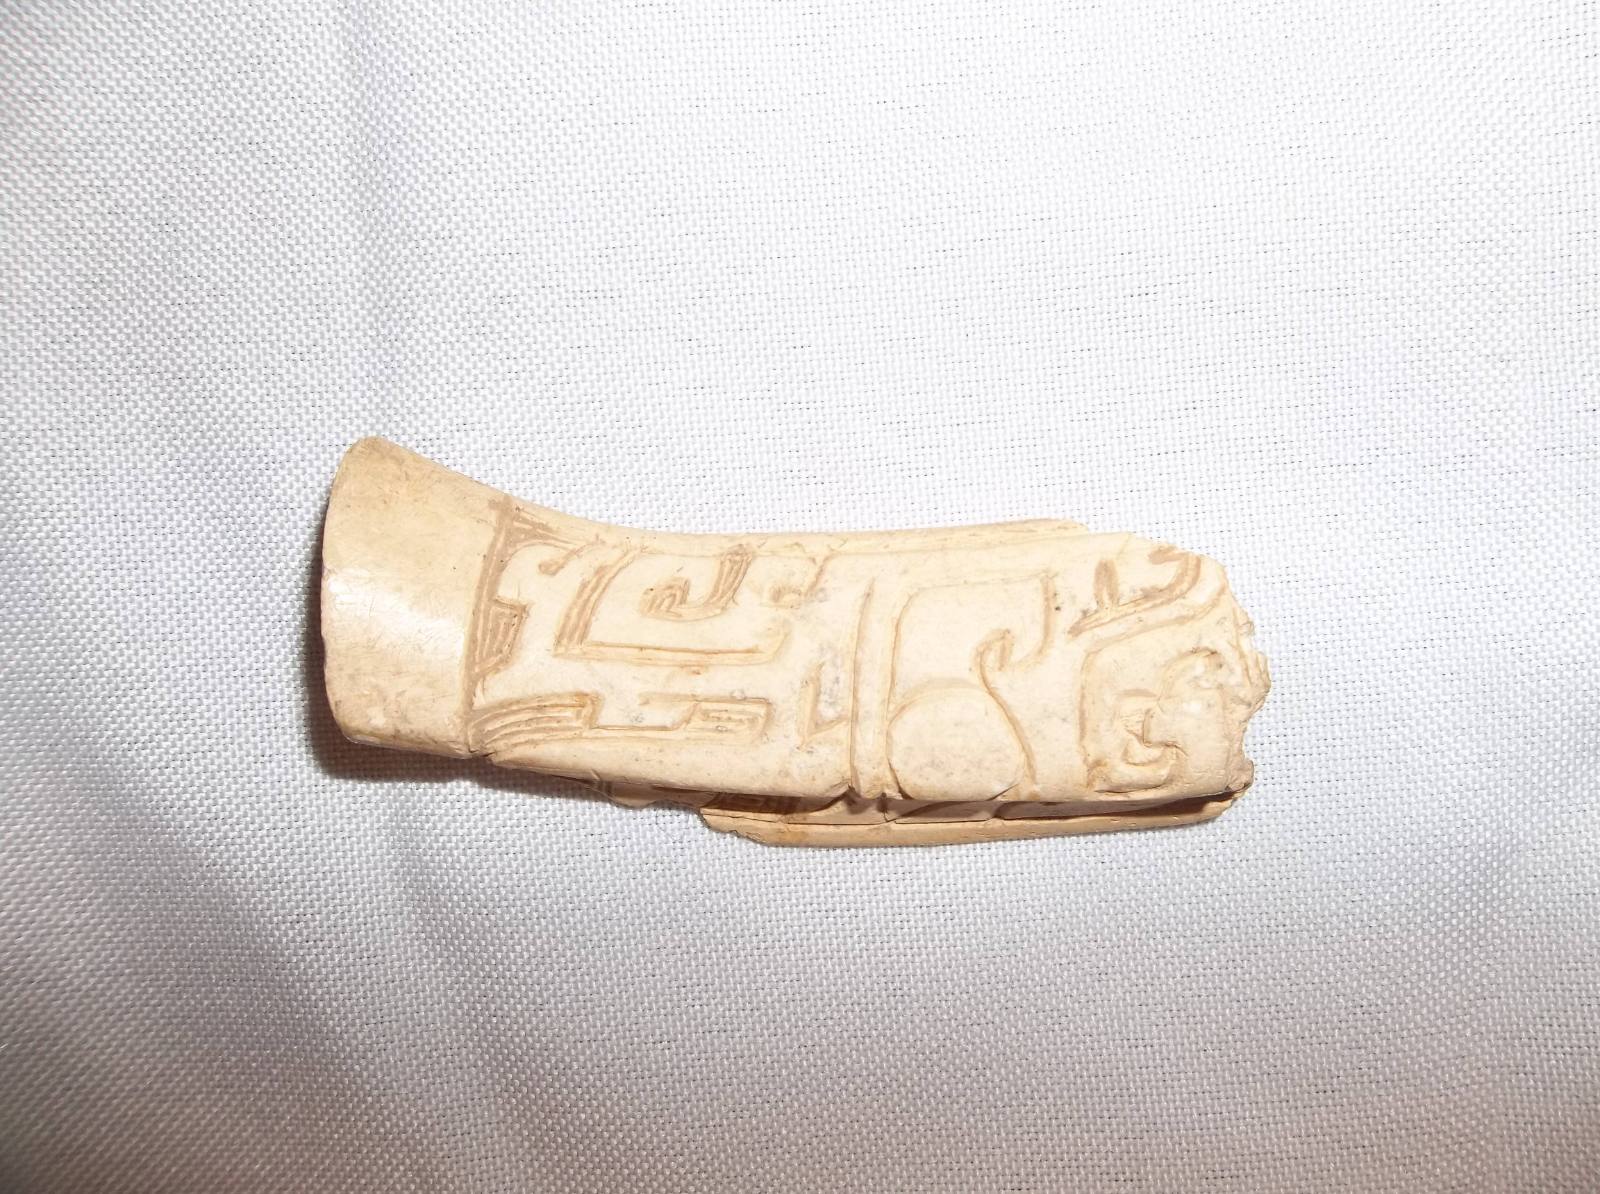 Fragment of a Spatula with Carved Taotie Decoration